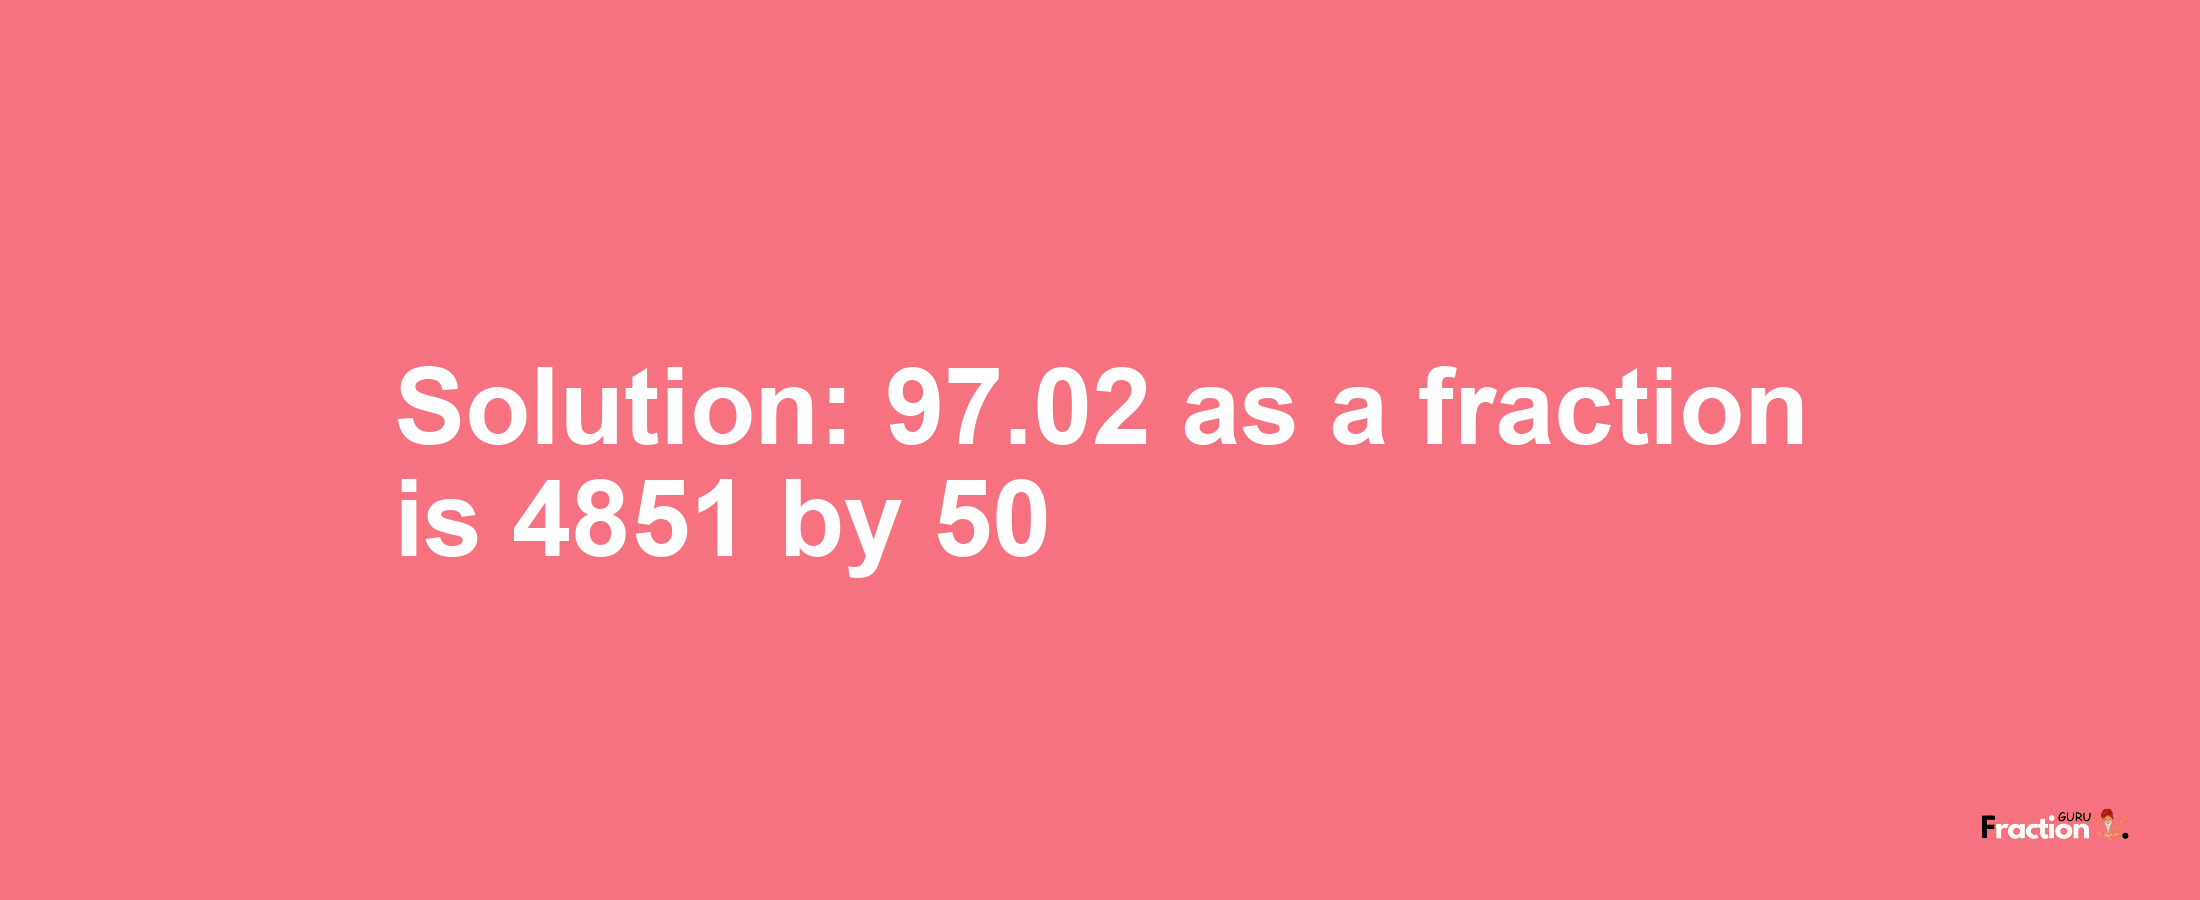 Solution:97.02 as a fraction is 4851/50